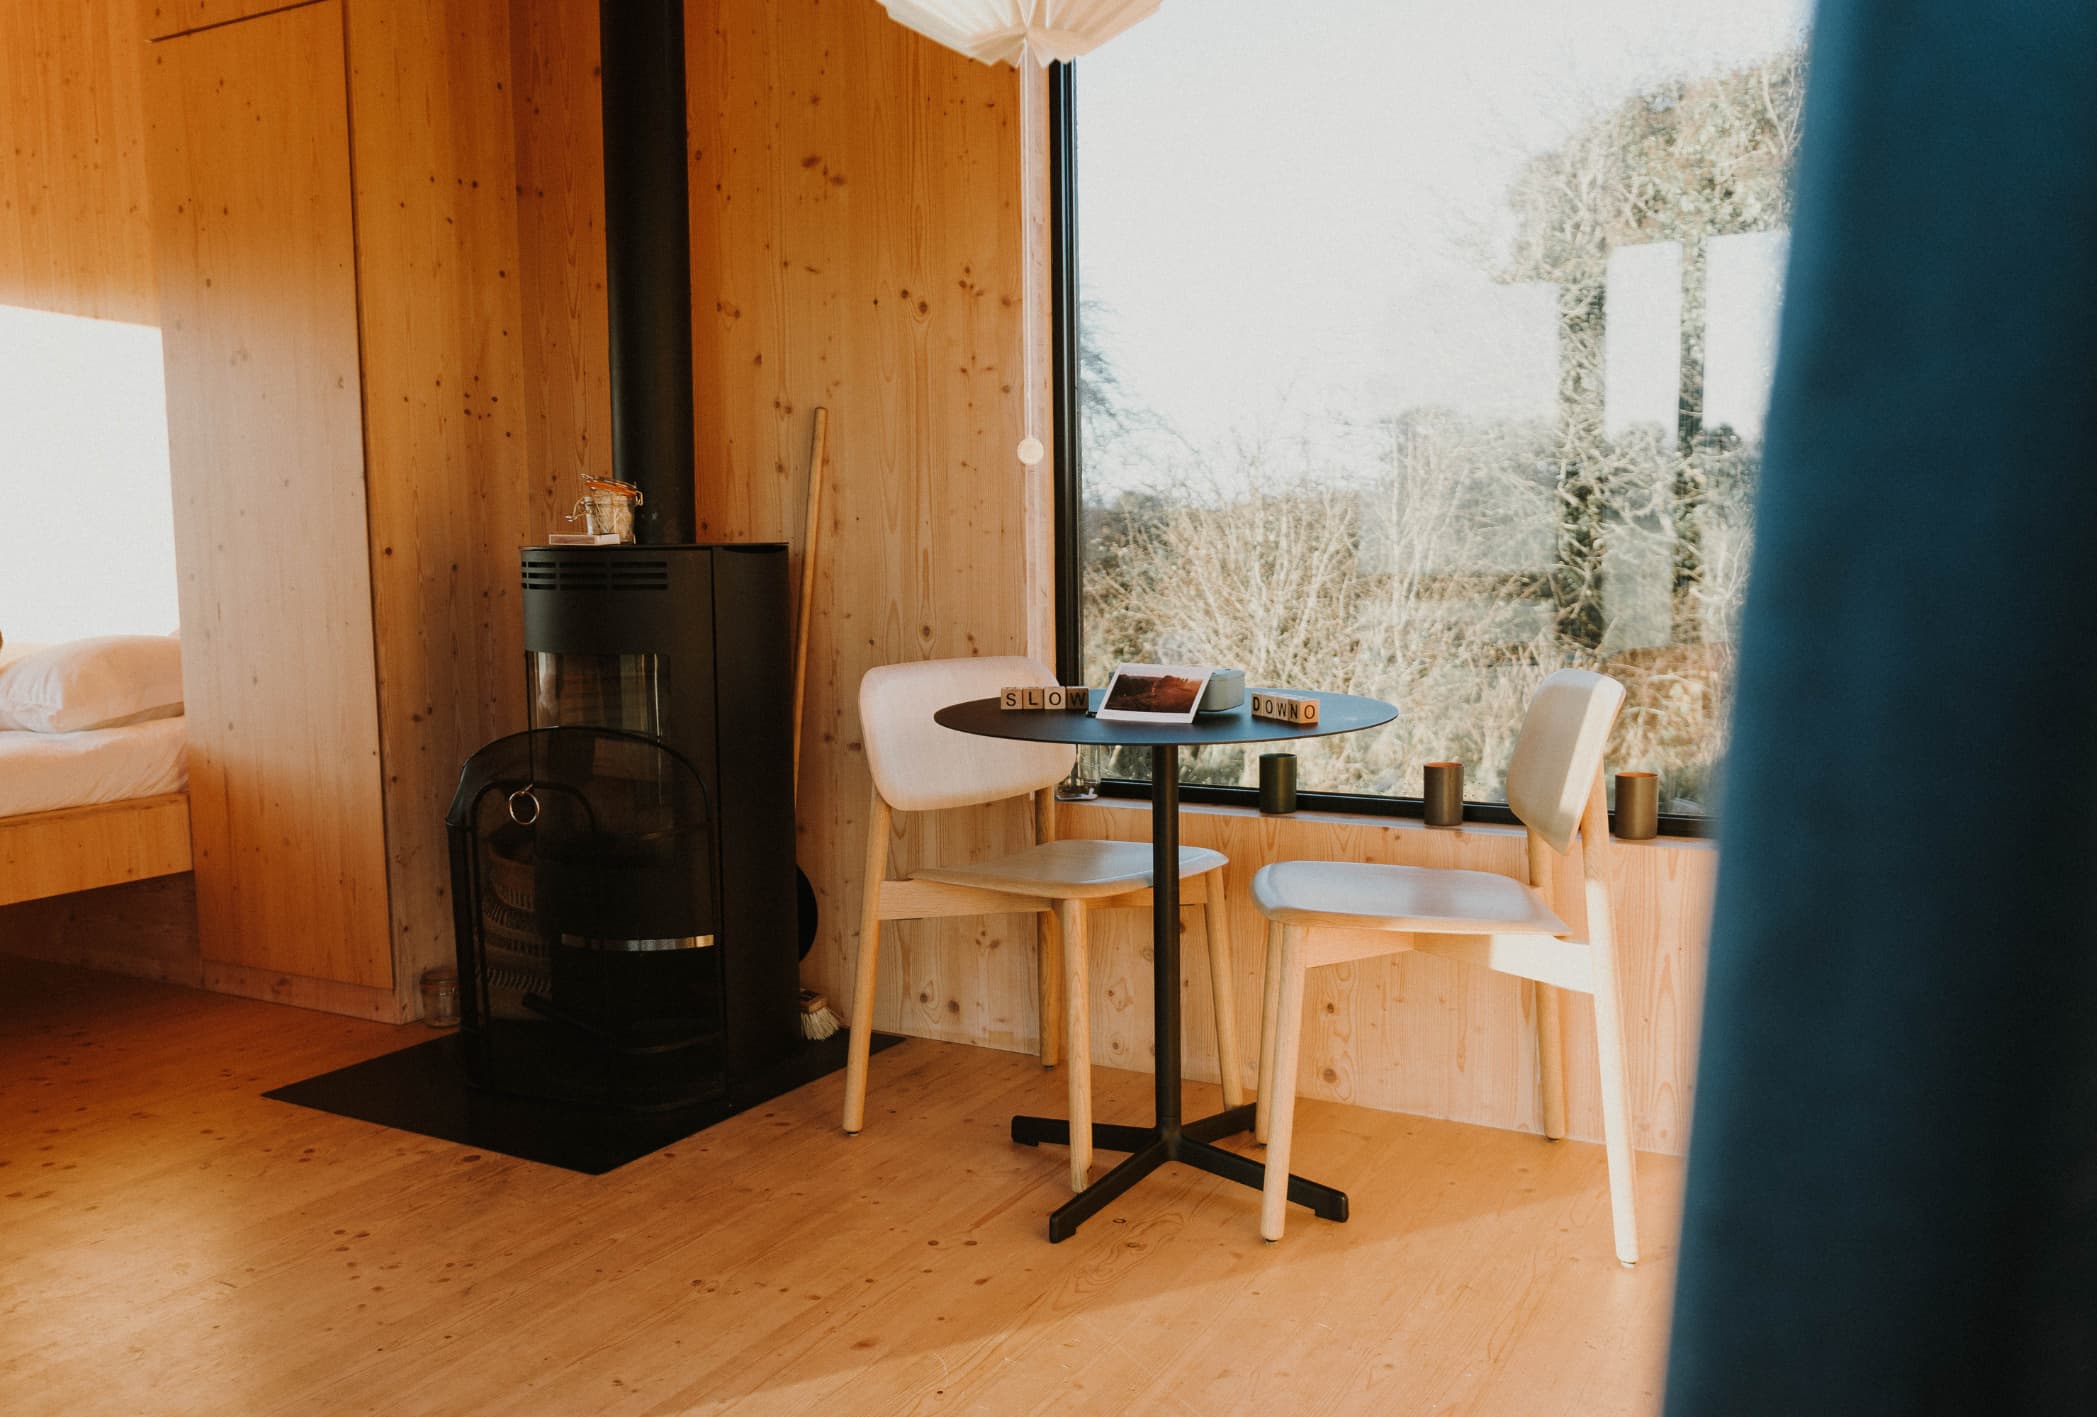 chairs, table and stove in a cabin